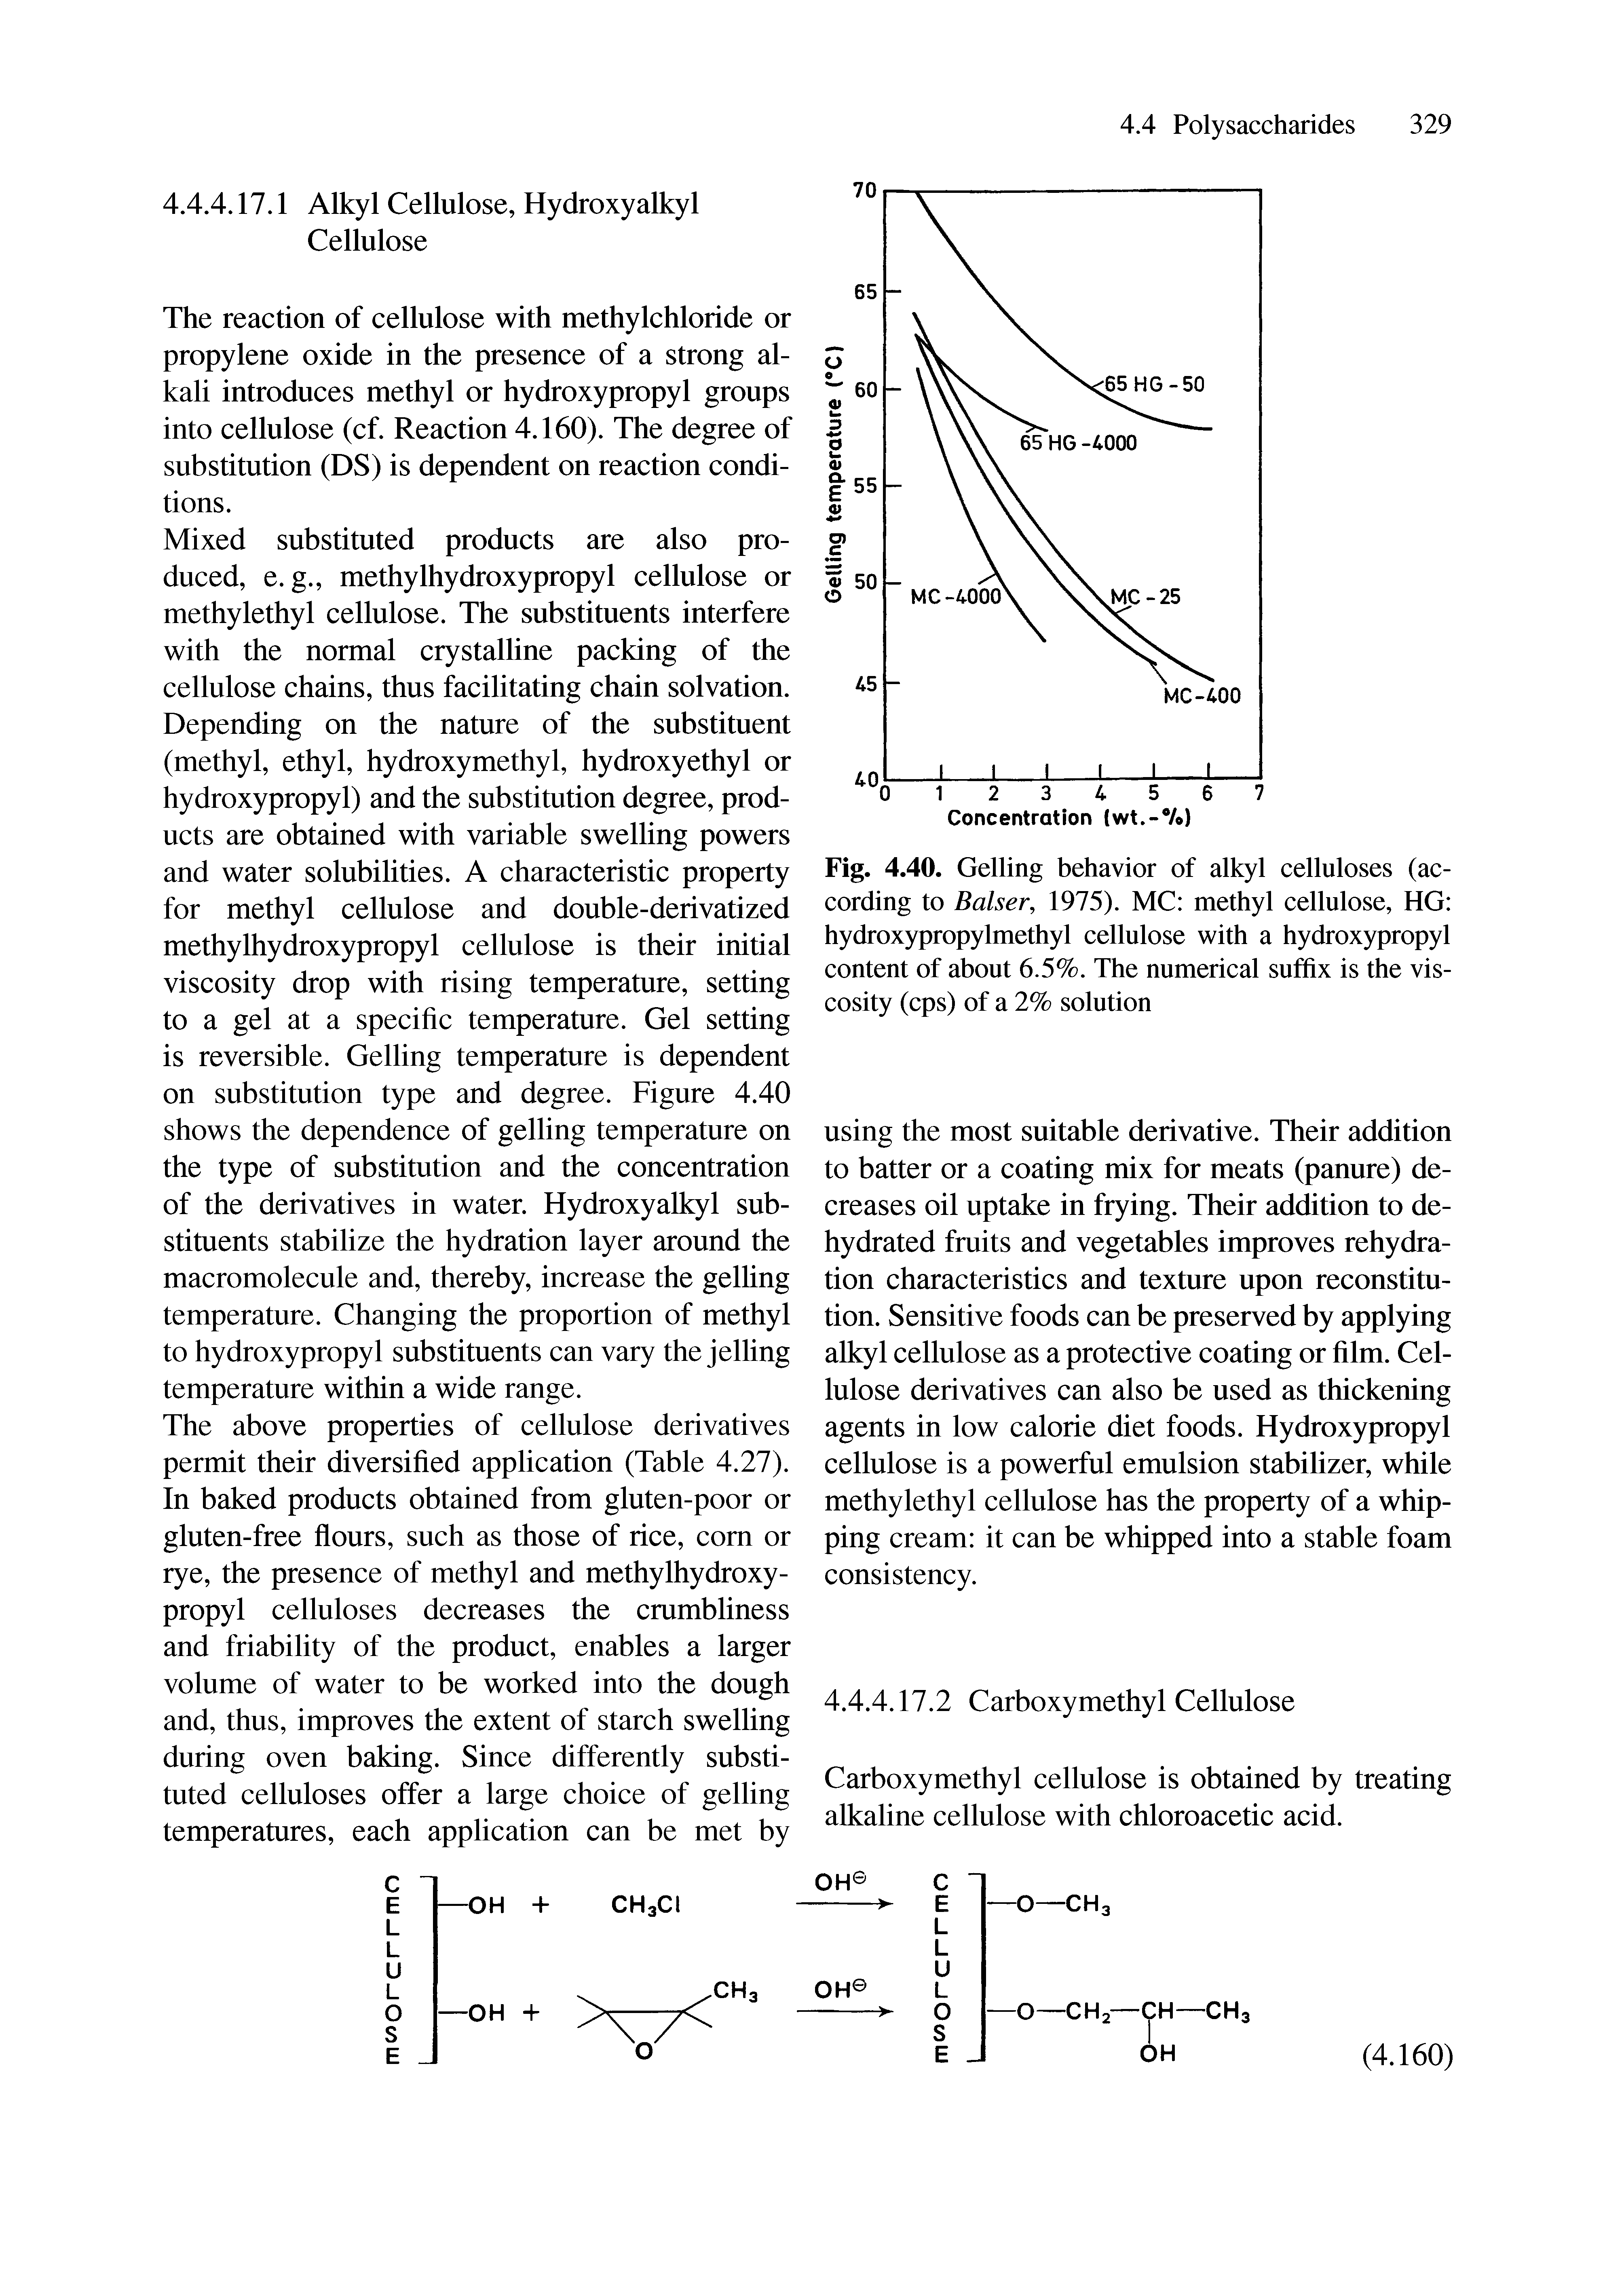 Fig. 4.40. Gelling behavior of alkyl celluloses (according to Balser, 1975). MC methyl cellulose, HG hydroxypropylmethyl cellulose with a hydroxypropyl content of about 6.5%. The numerical suffix is the viscosity (cps) of a 2% solution...